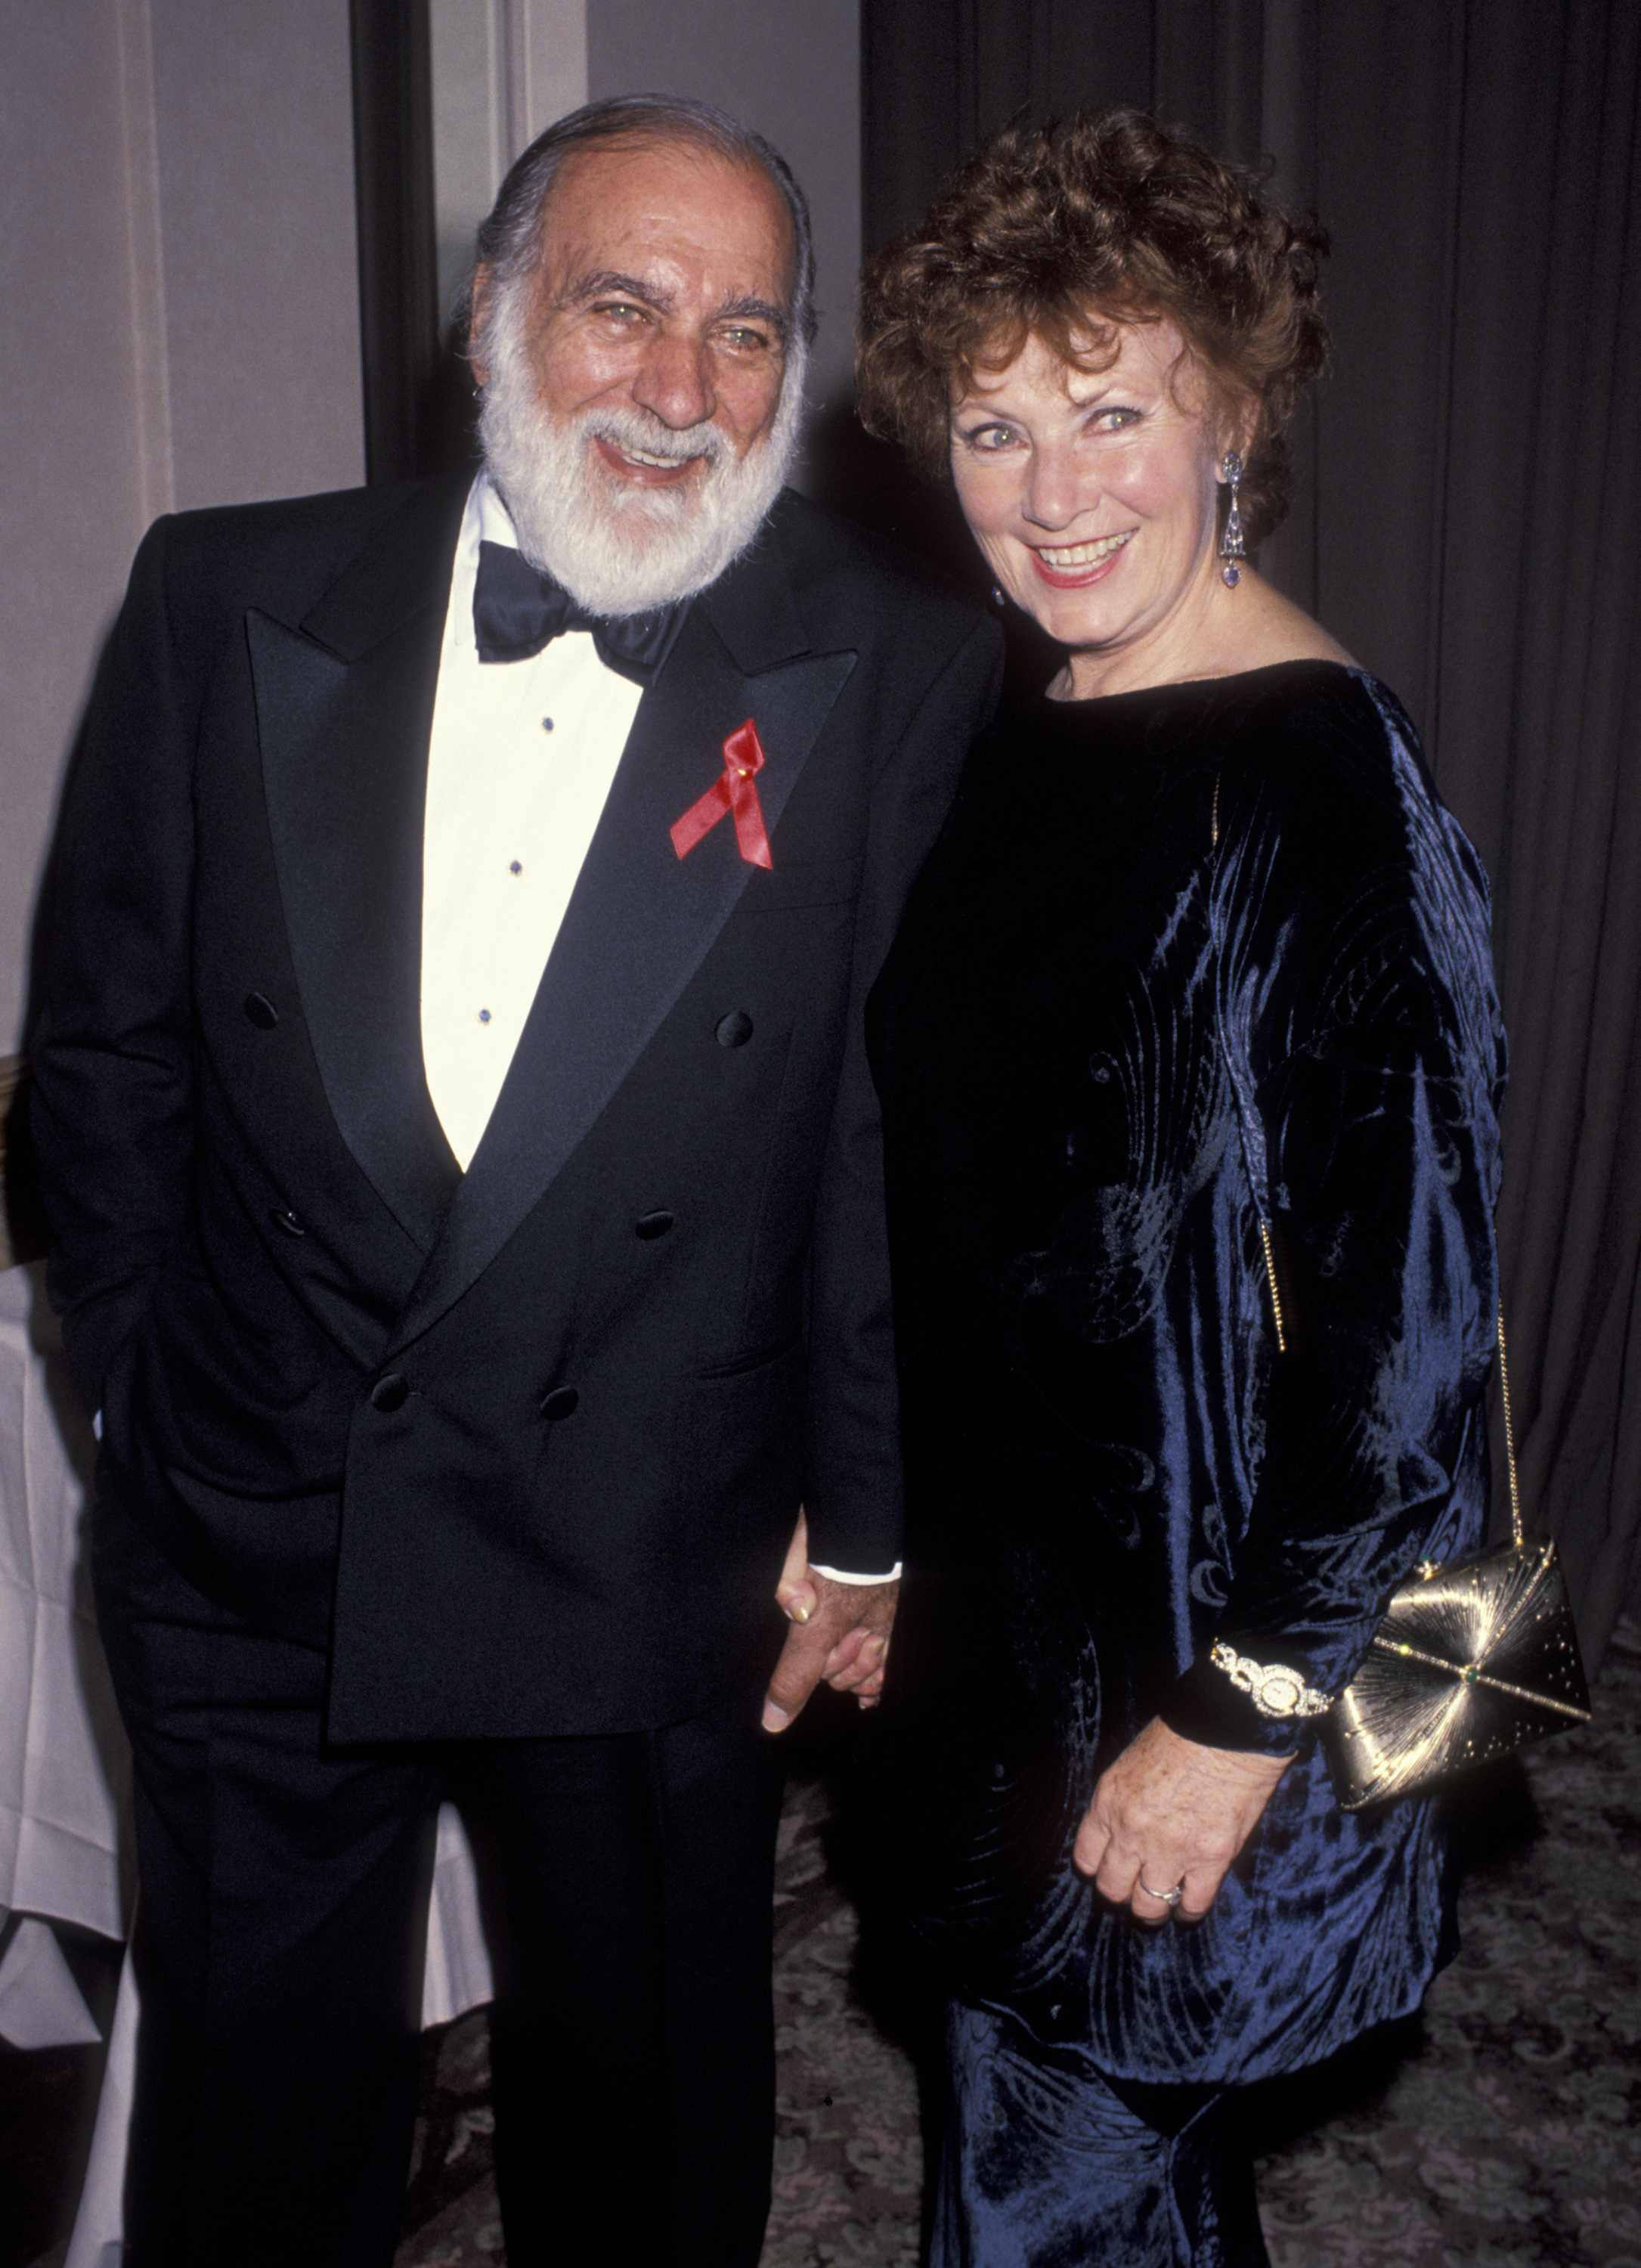 Marion Ross and actor Paul Michael attending 'Academy of Television Arts and Sciences Gala Honoring Top College Films' on March 14, 1993 at the Beverly Hilton Hotel in Beverly Hills, California | Source: Getty Images